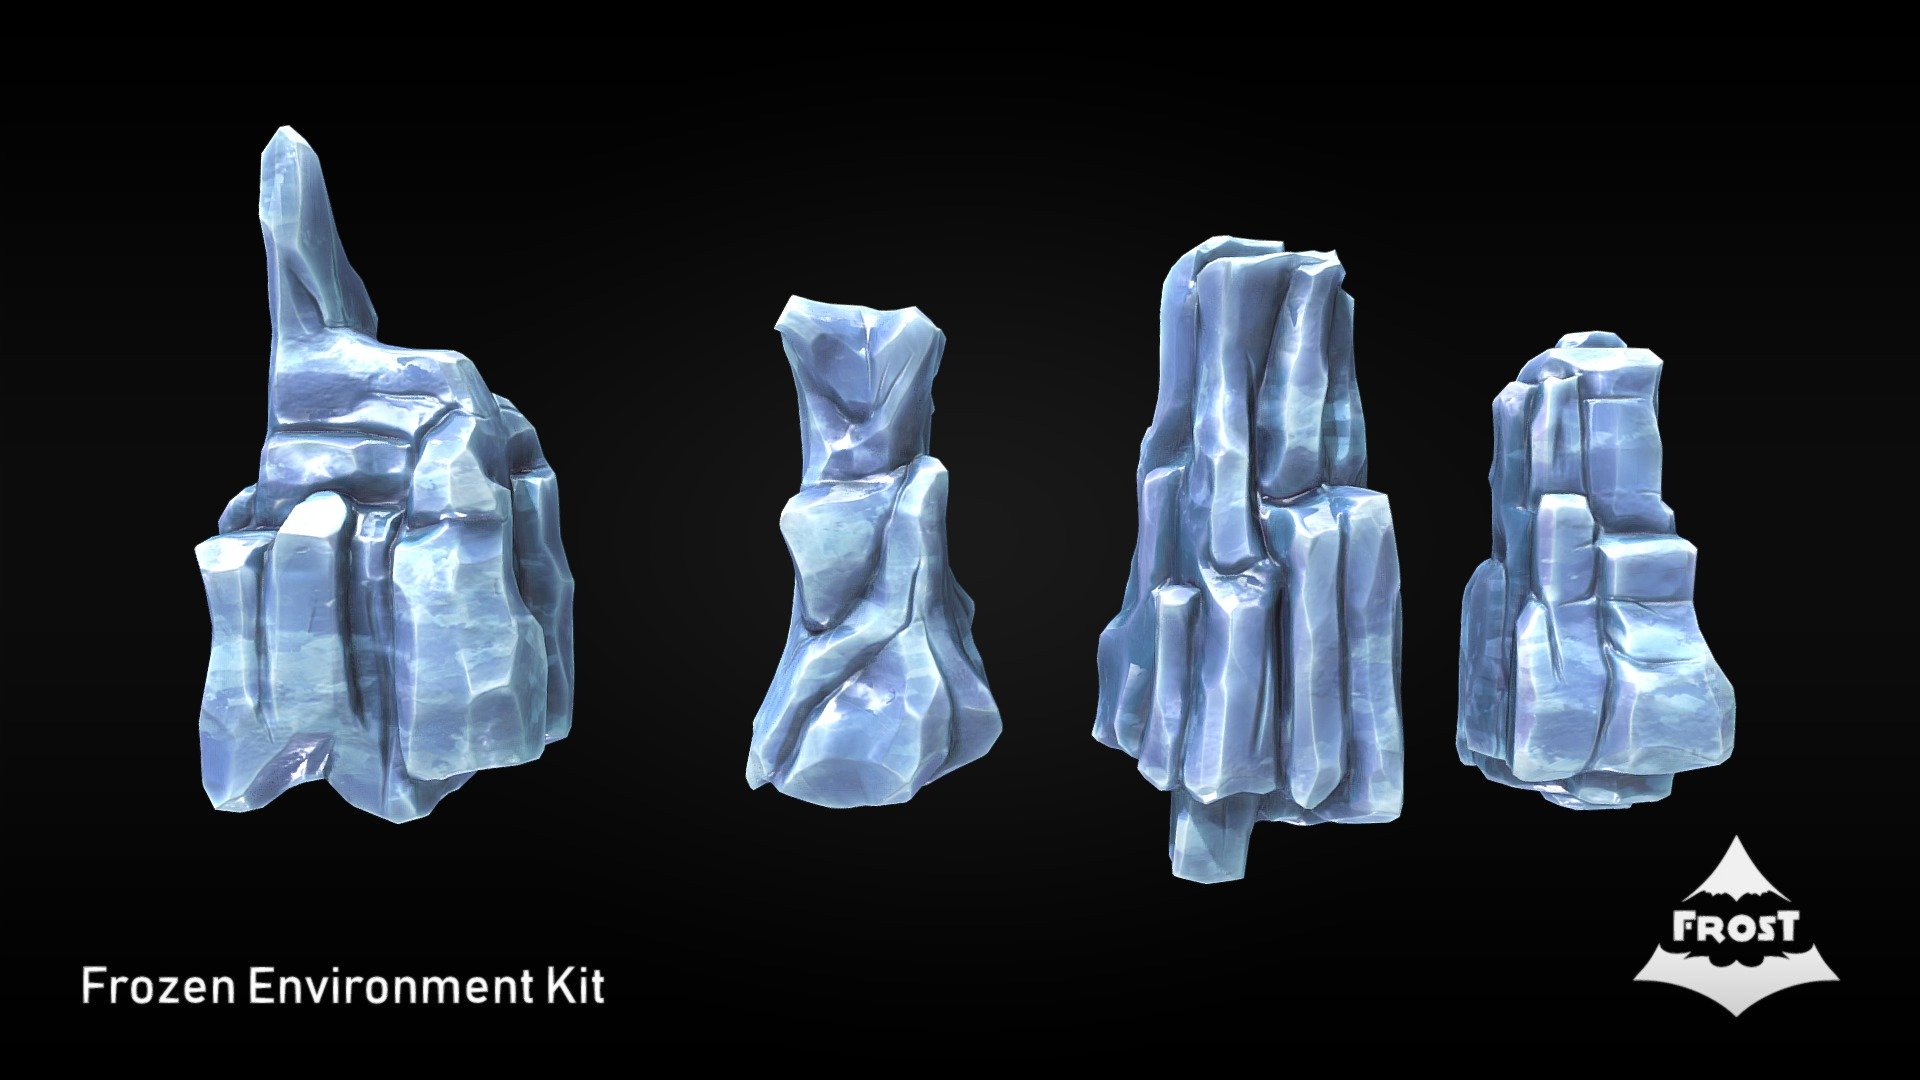 This pack is a fully PBR driven part of my FROST asset pack.
It contains the following assets:




4 Textured Frost Blocks (Large)

Each asset comes with 4K resolution Albedo, Glossiness, Roughness, Normal, Emission, Specular Color, Specular Level, AO and Height Maps.
The Height Maps can be used in game or rendering engines to blend other textures with the asset. The textures were atlased onto a single texture sheet.
All of the assets are based on manually created high poly sculpts and had their textures specifically created for them. They were optimized for use in realtime game engines.
As PBR assets they are recommended for desktop but the polycount will have no problem running on mobile as well and can still be further reduced if necessary.

The FROST Environment Kit is split as separate packages so that you can purchase only those assets that you really need, for a significantly lower price compared to a full asset pack 3d model